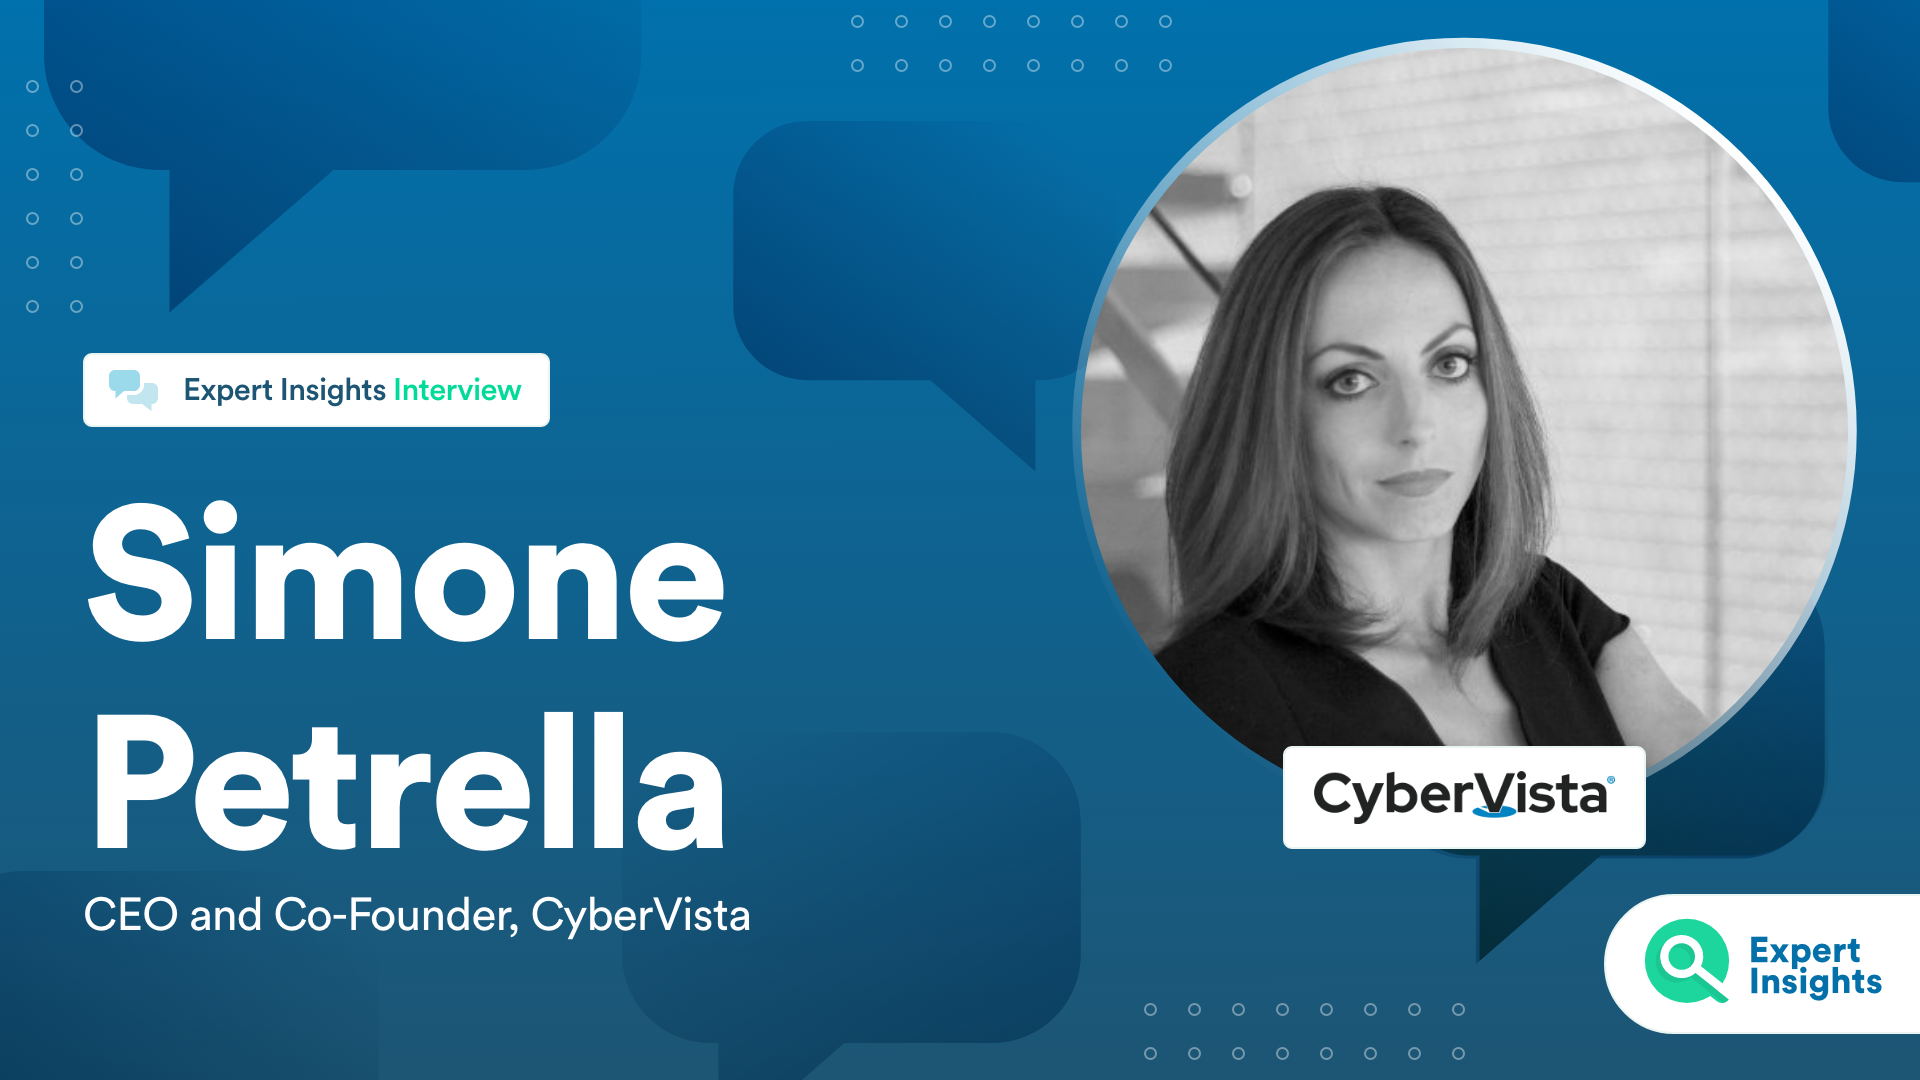 Expert Insights Interview With Simone Petrella Of CyberVista